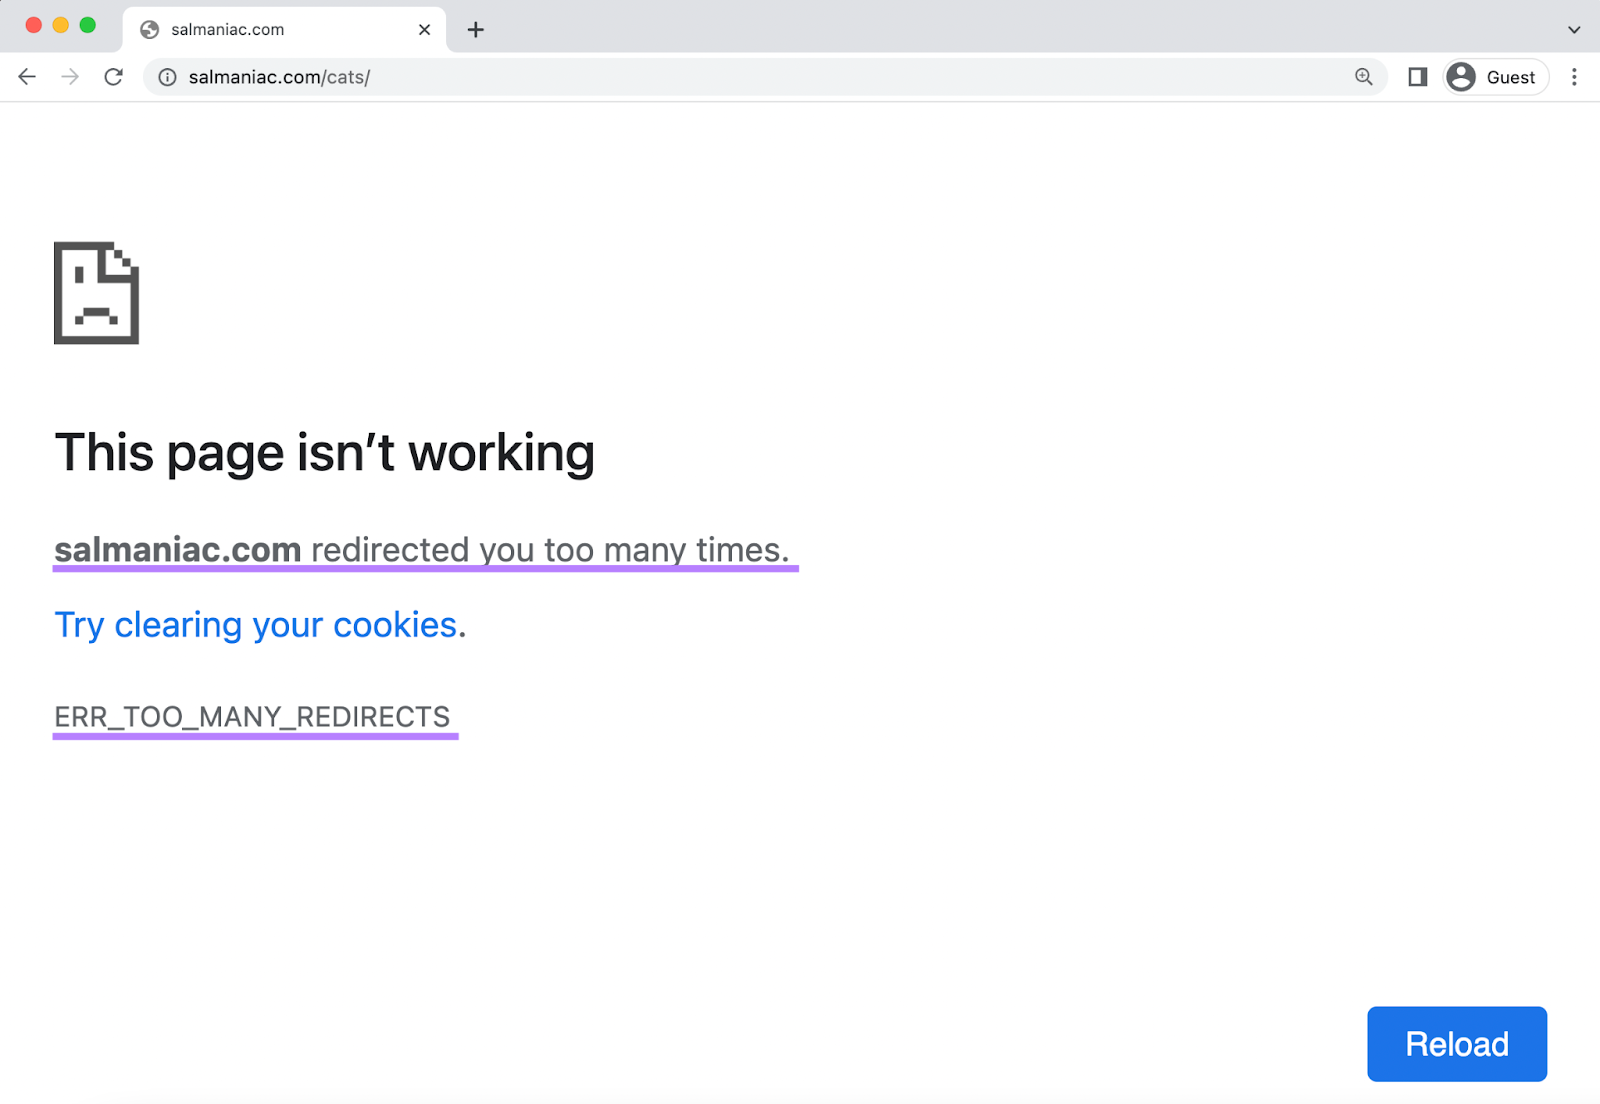 “too many redirects” error message example